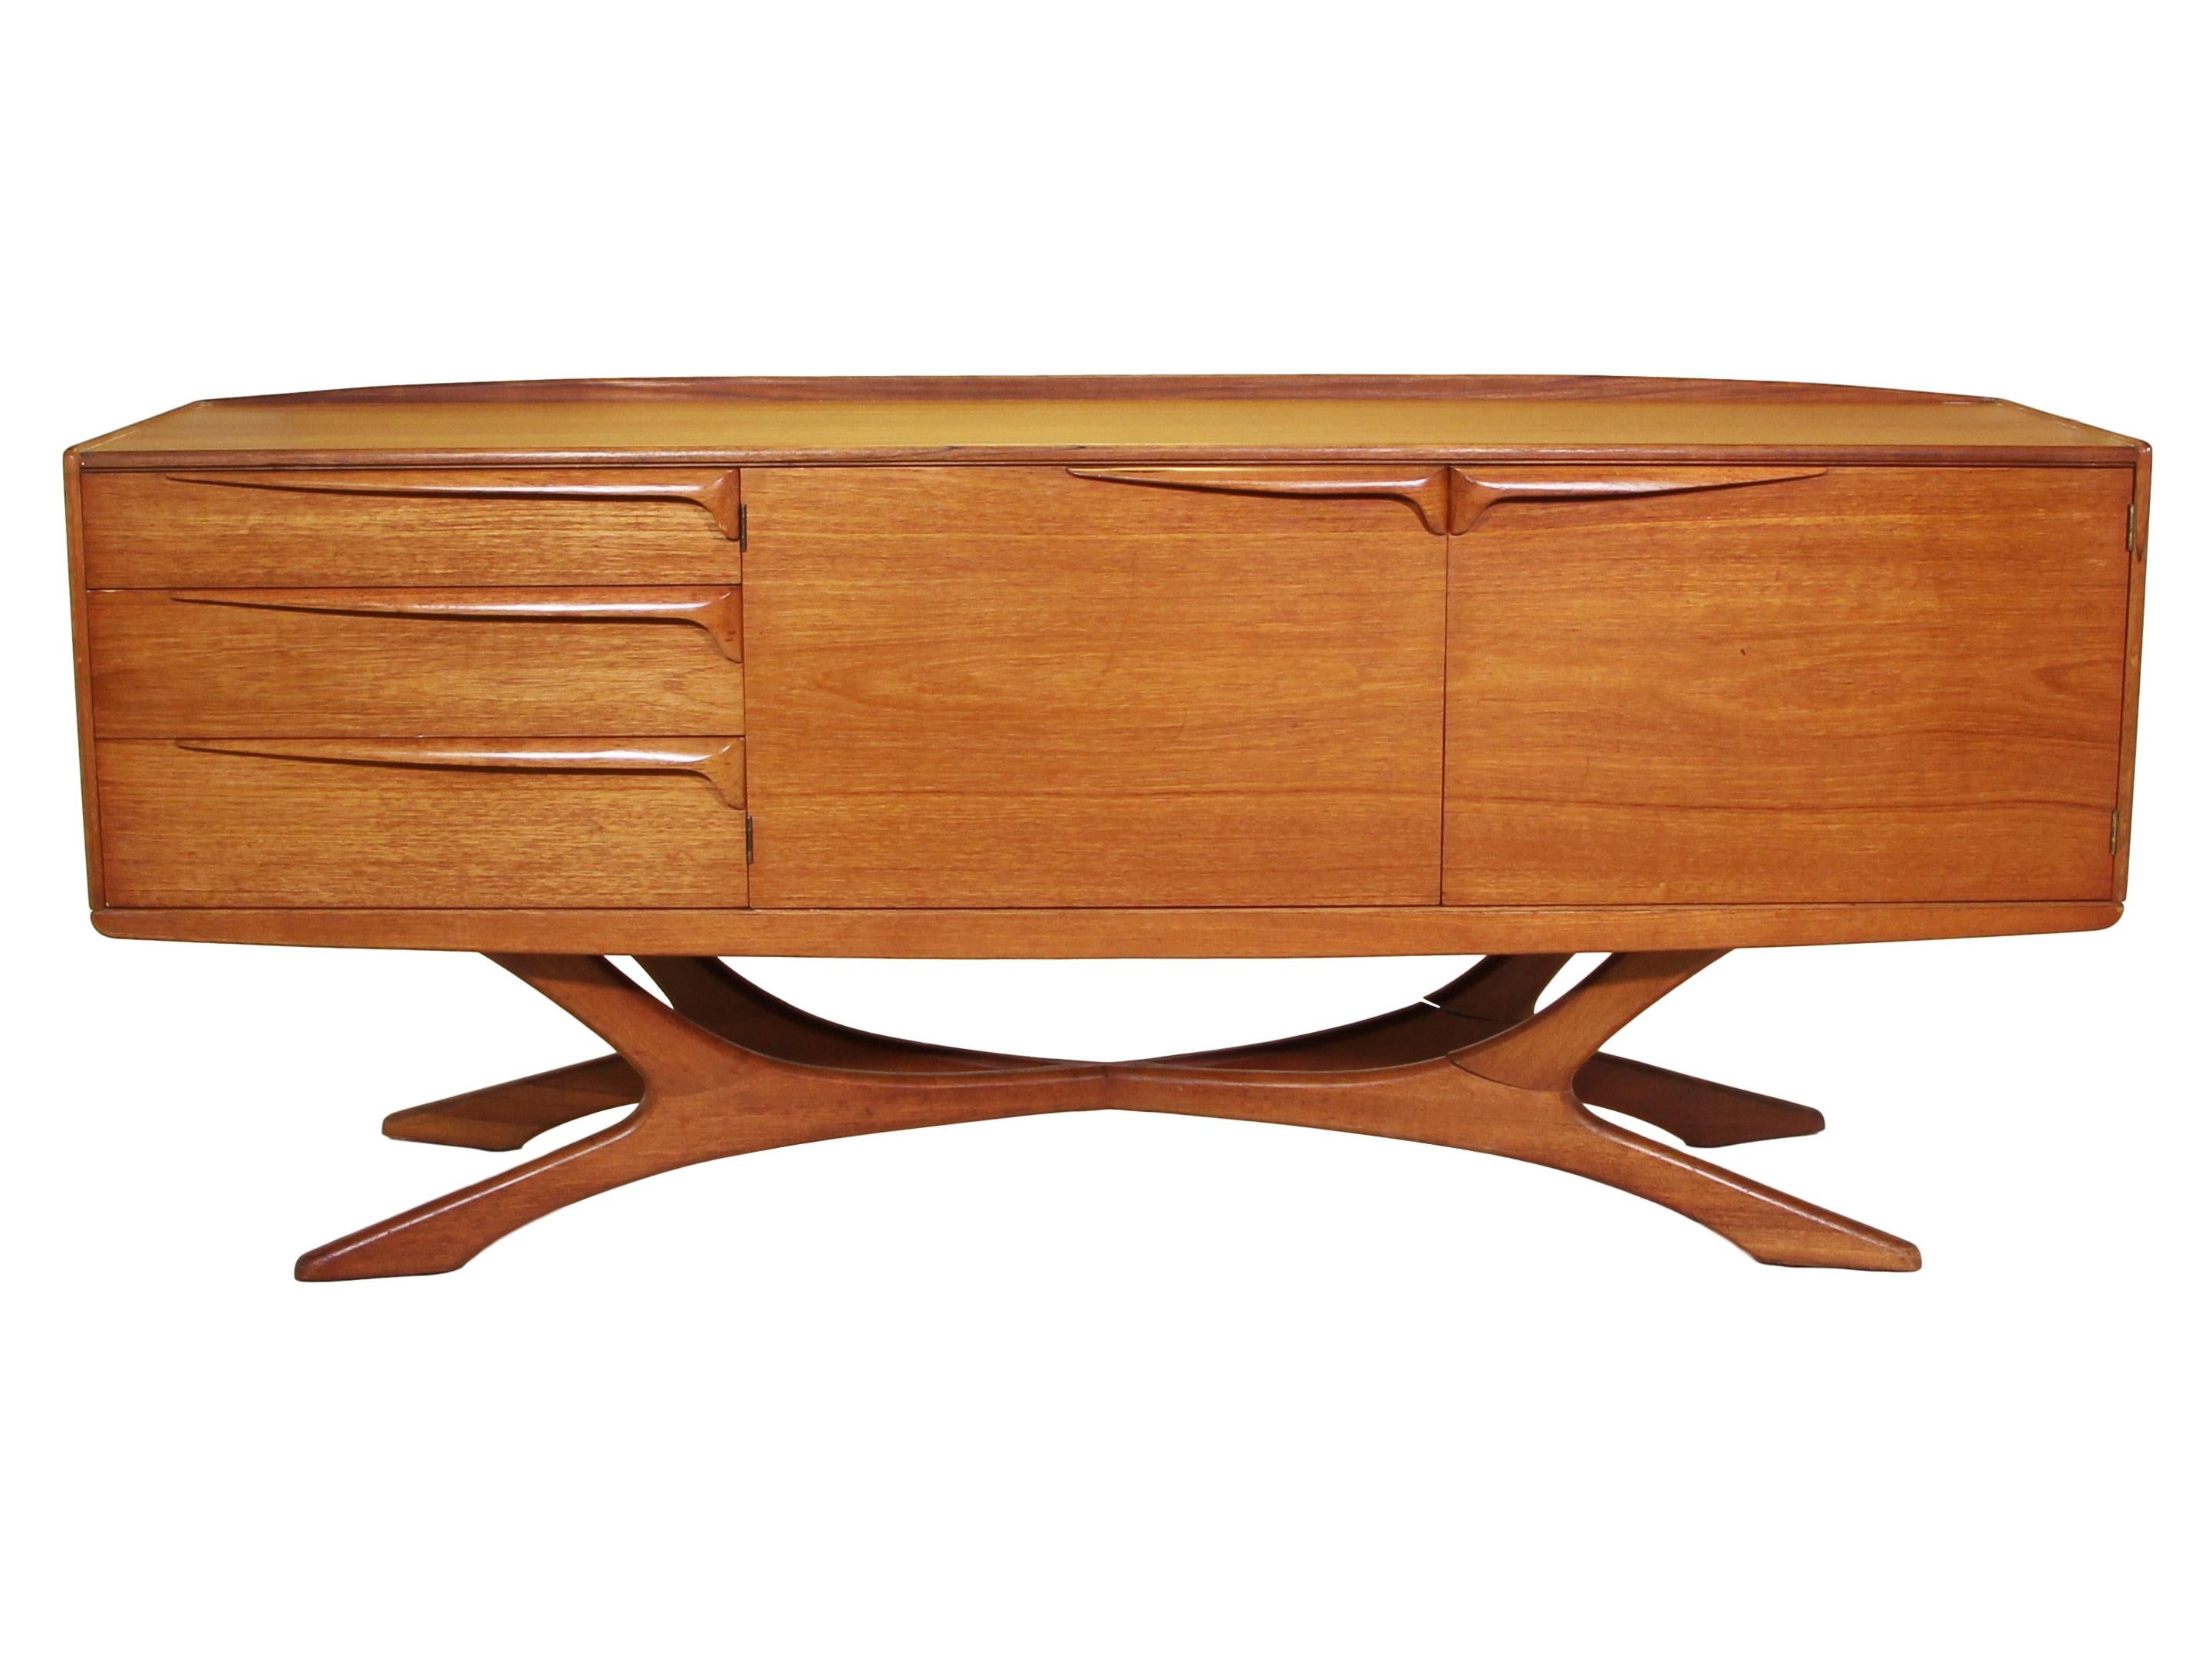 Midcentury credenza by Beithcraft. Only a limited number of these magnificent credenzas were made. The organic leg design and long sculpted handles make this piece the focal point of any room.

Very good vintage condition. The joints in the legs